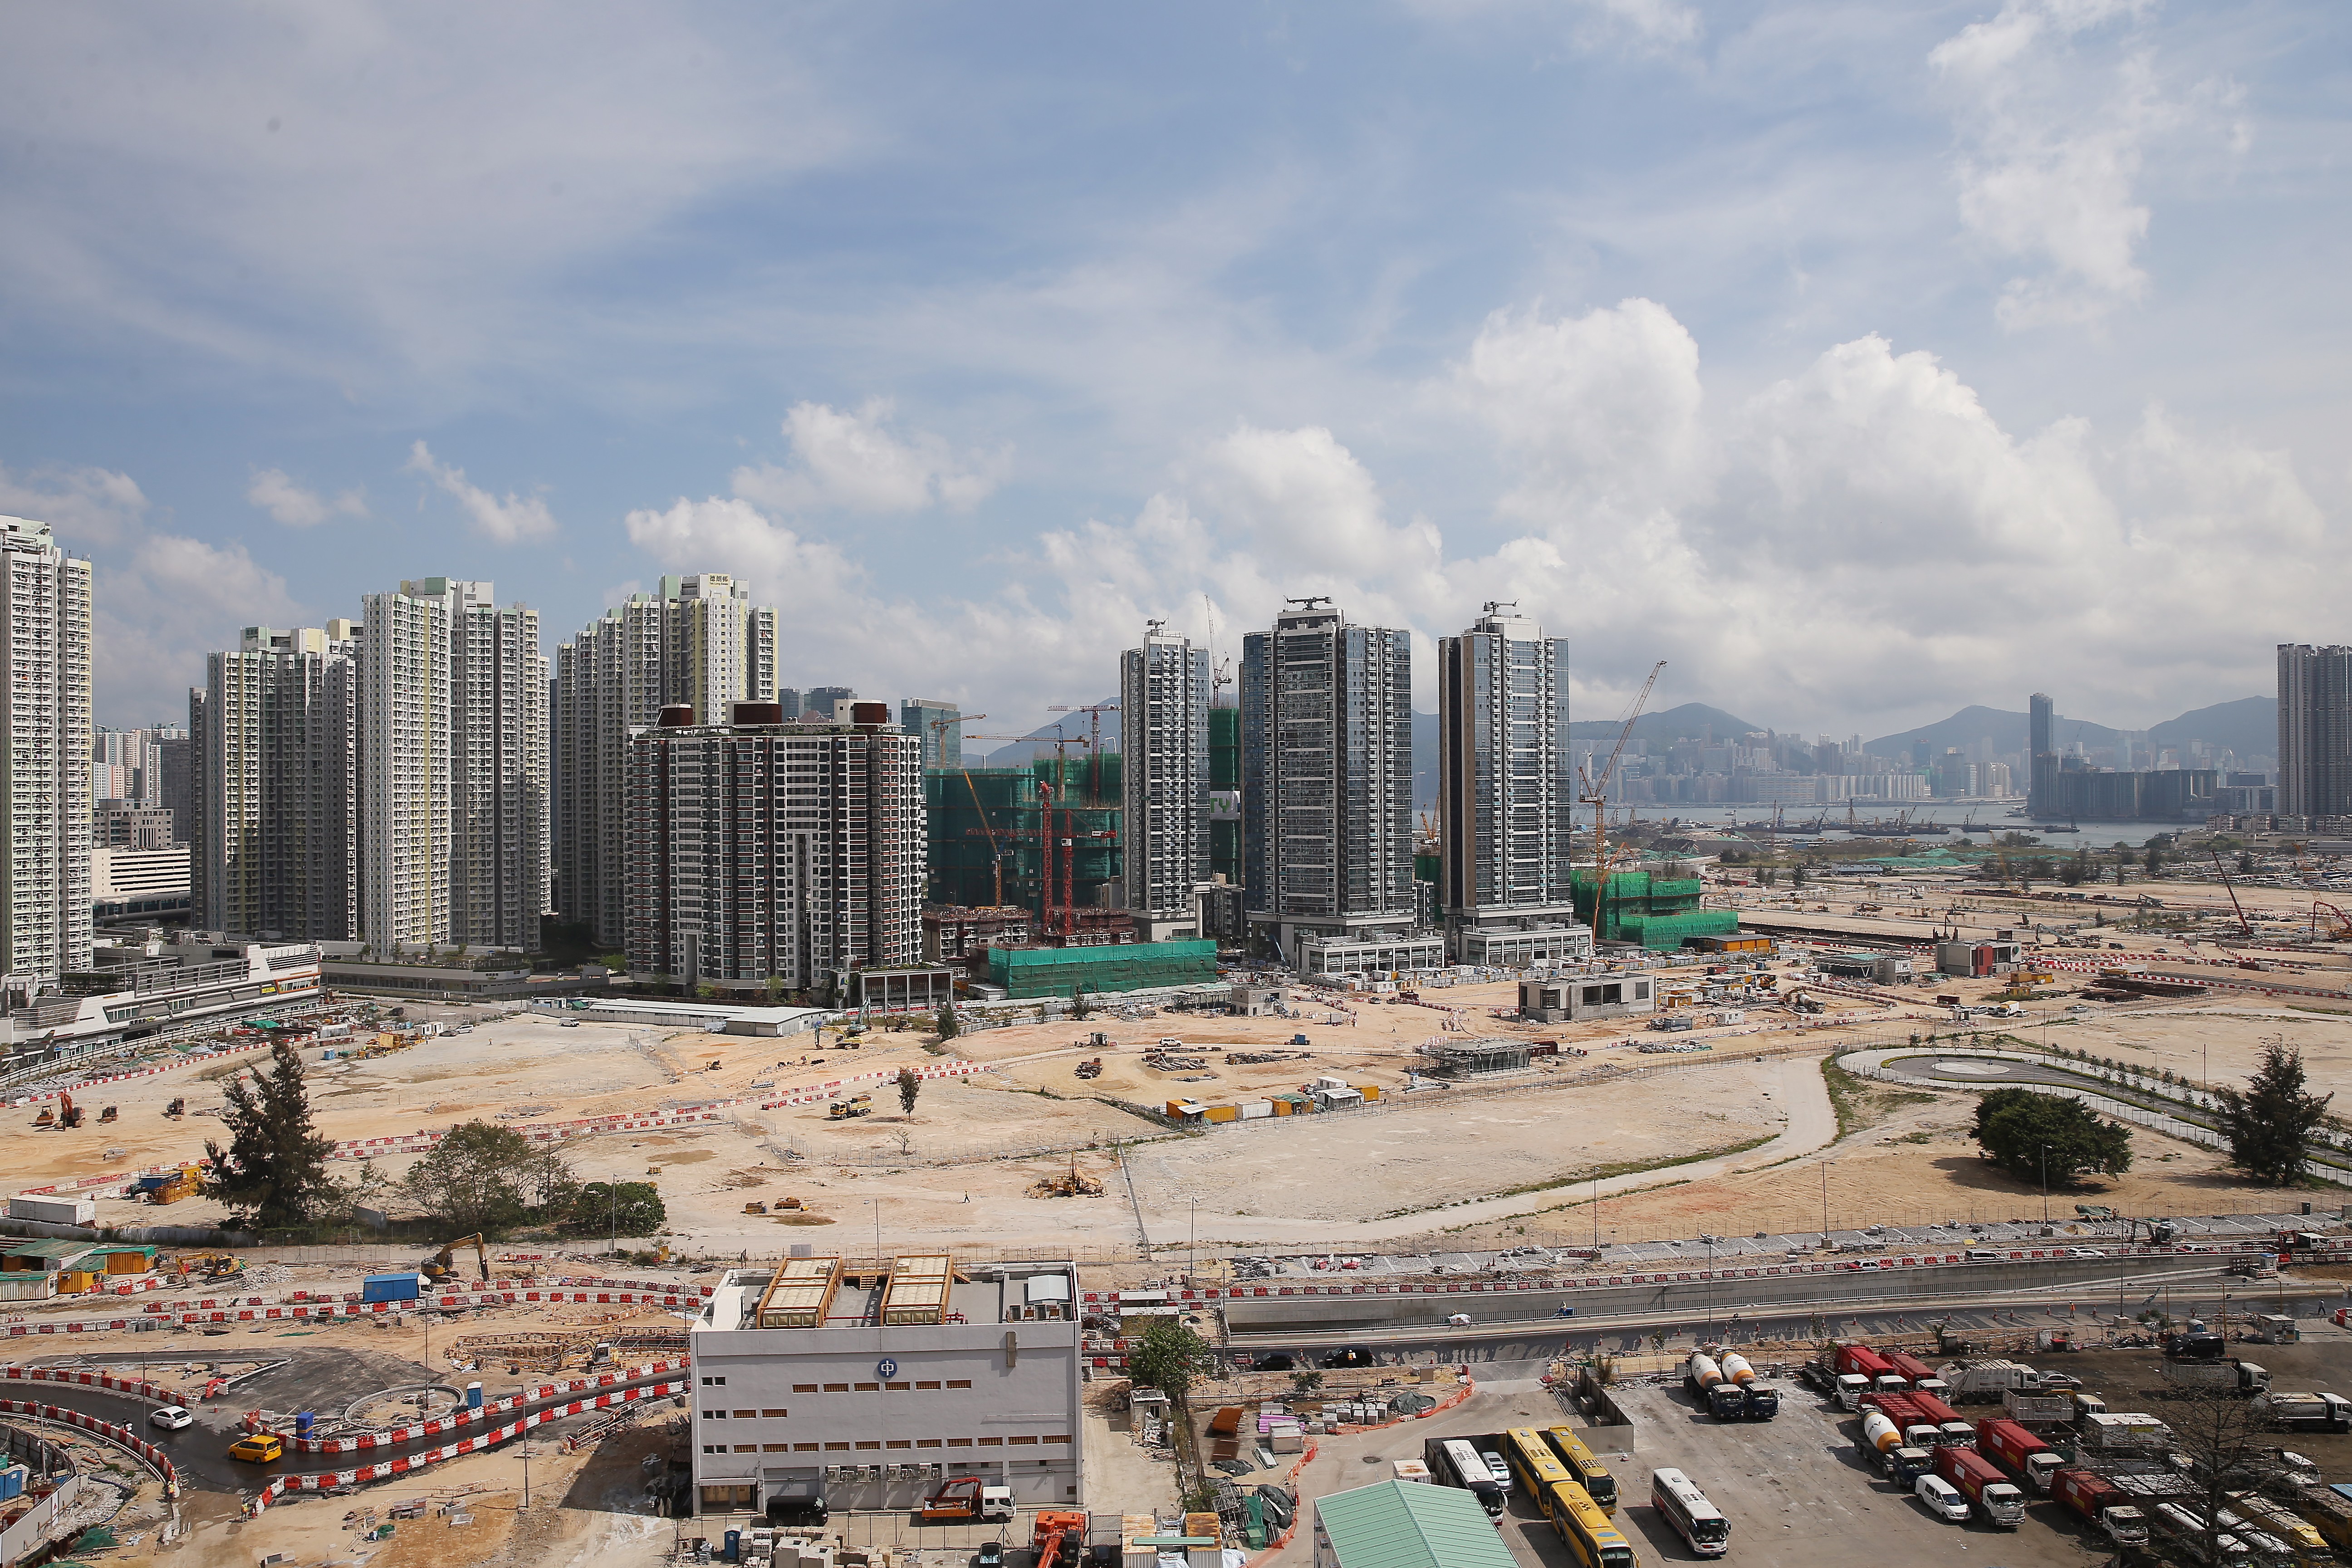 The government has proposed to allocate a HK$180 million bid incentive to draw more bidders and participants in the tender for the controversial Kai Tak Sports Park project. Photo: Sam Tsang